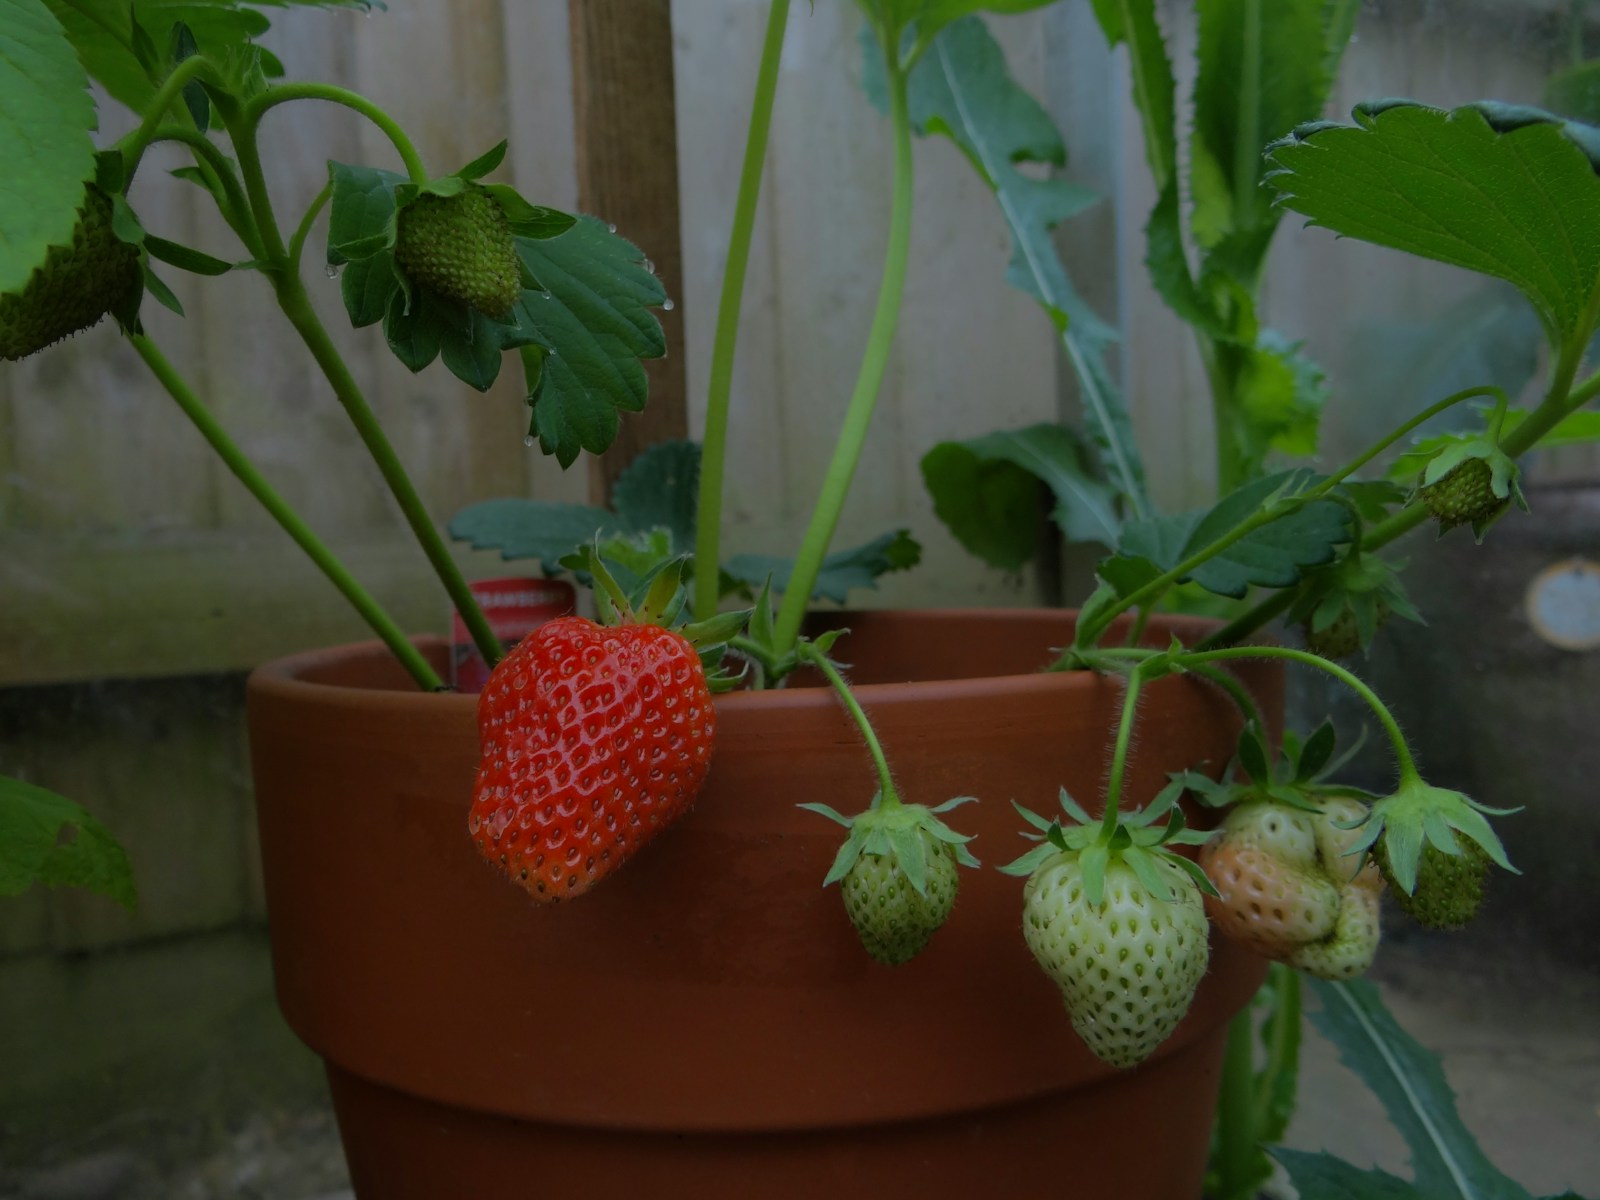 three strawberries are growing in a clay pot